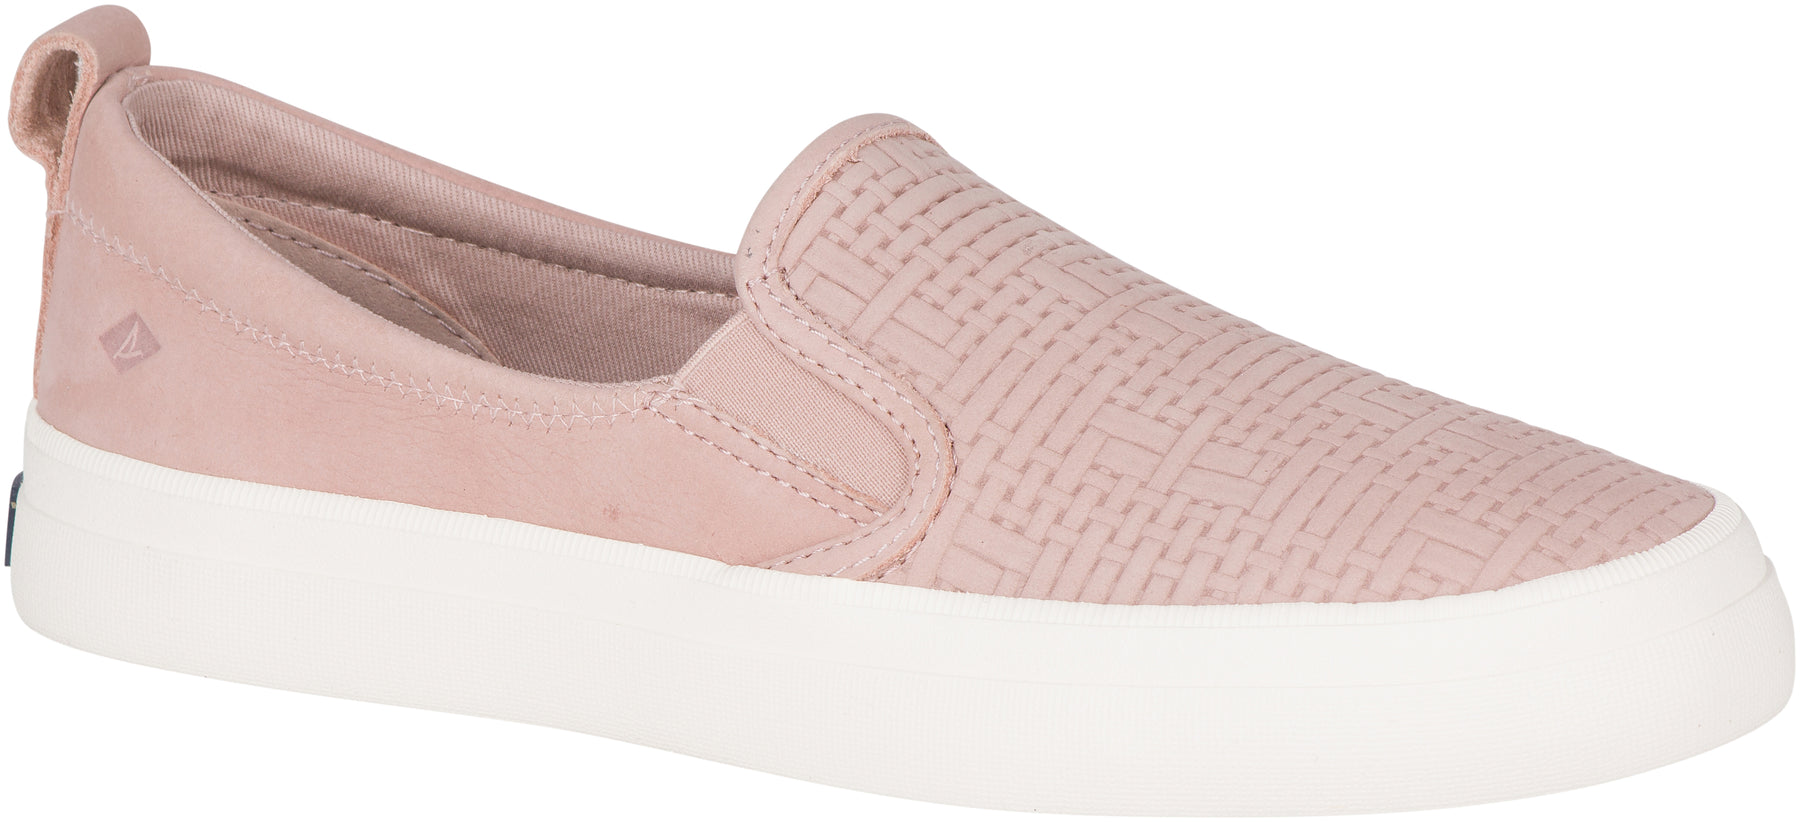 Sperry Ladies Crest Twin Gore Emboss Rose Dust (STS84537)